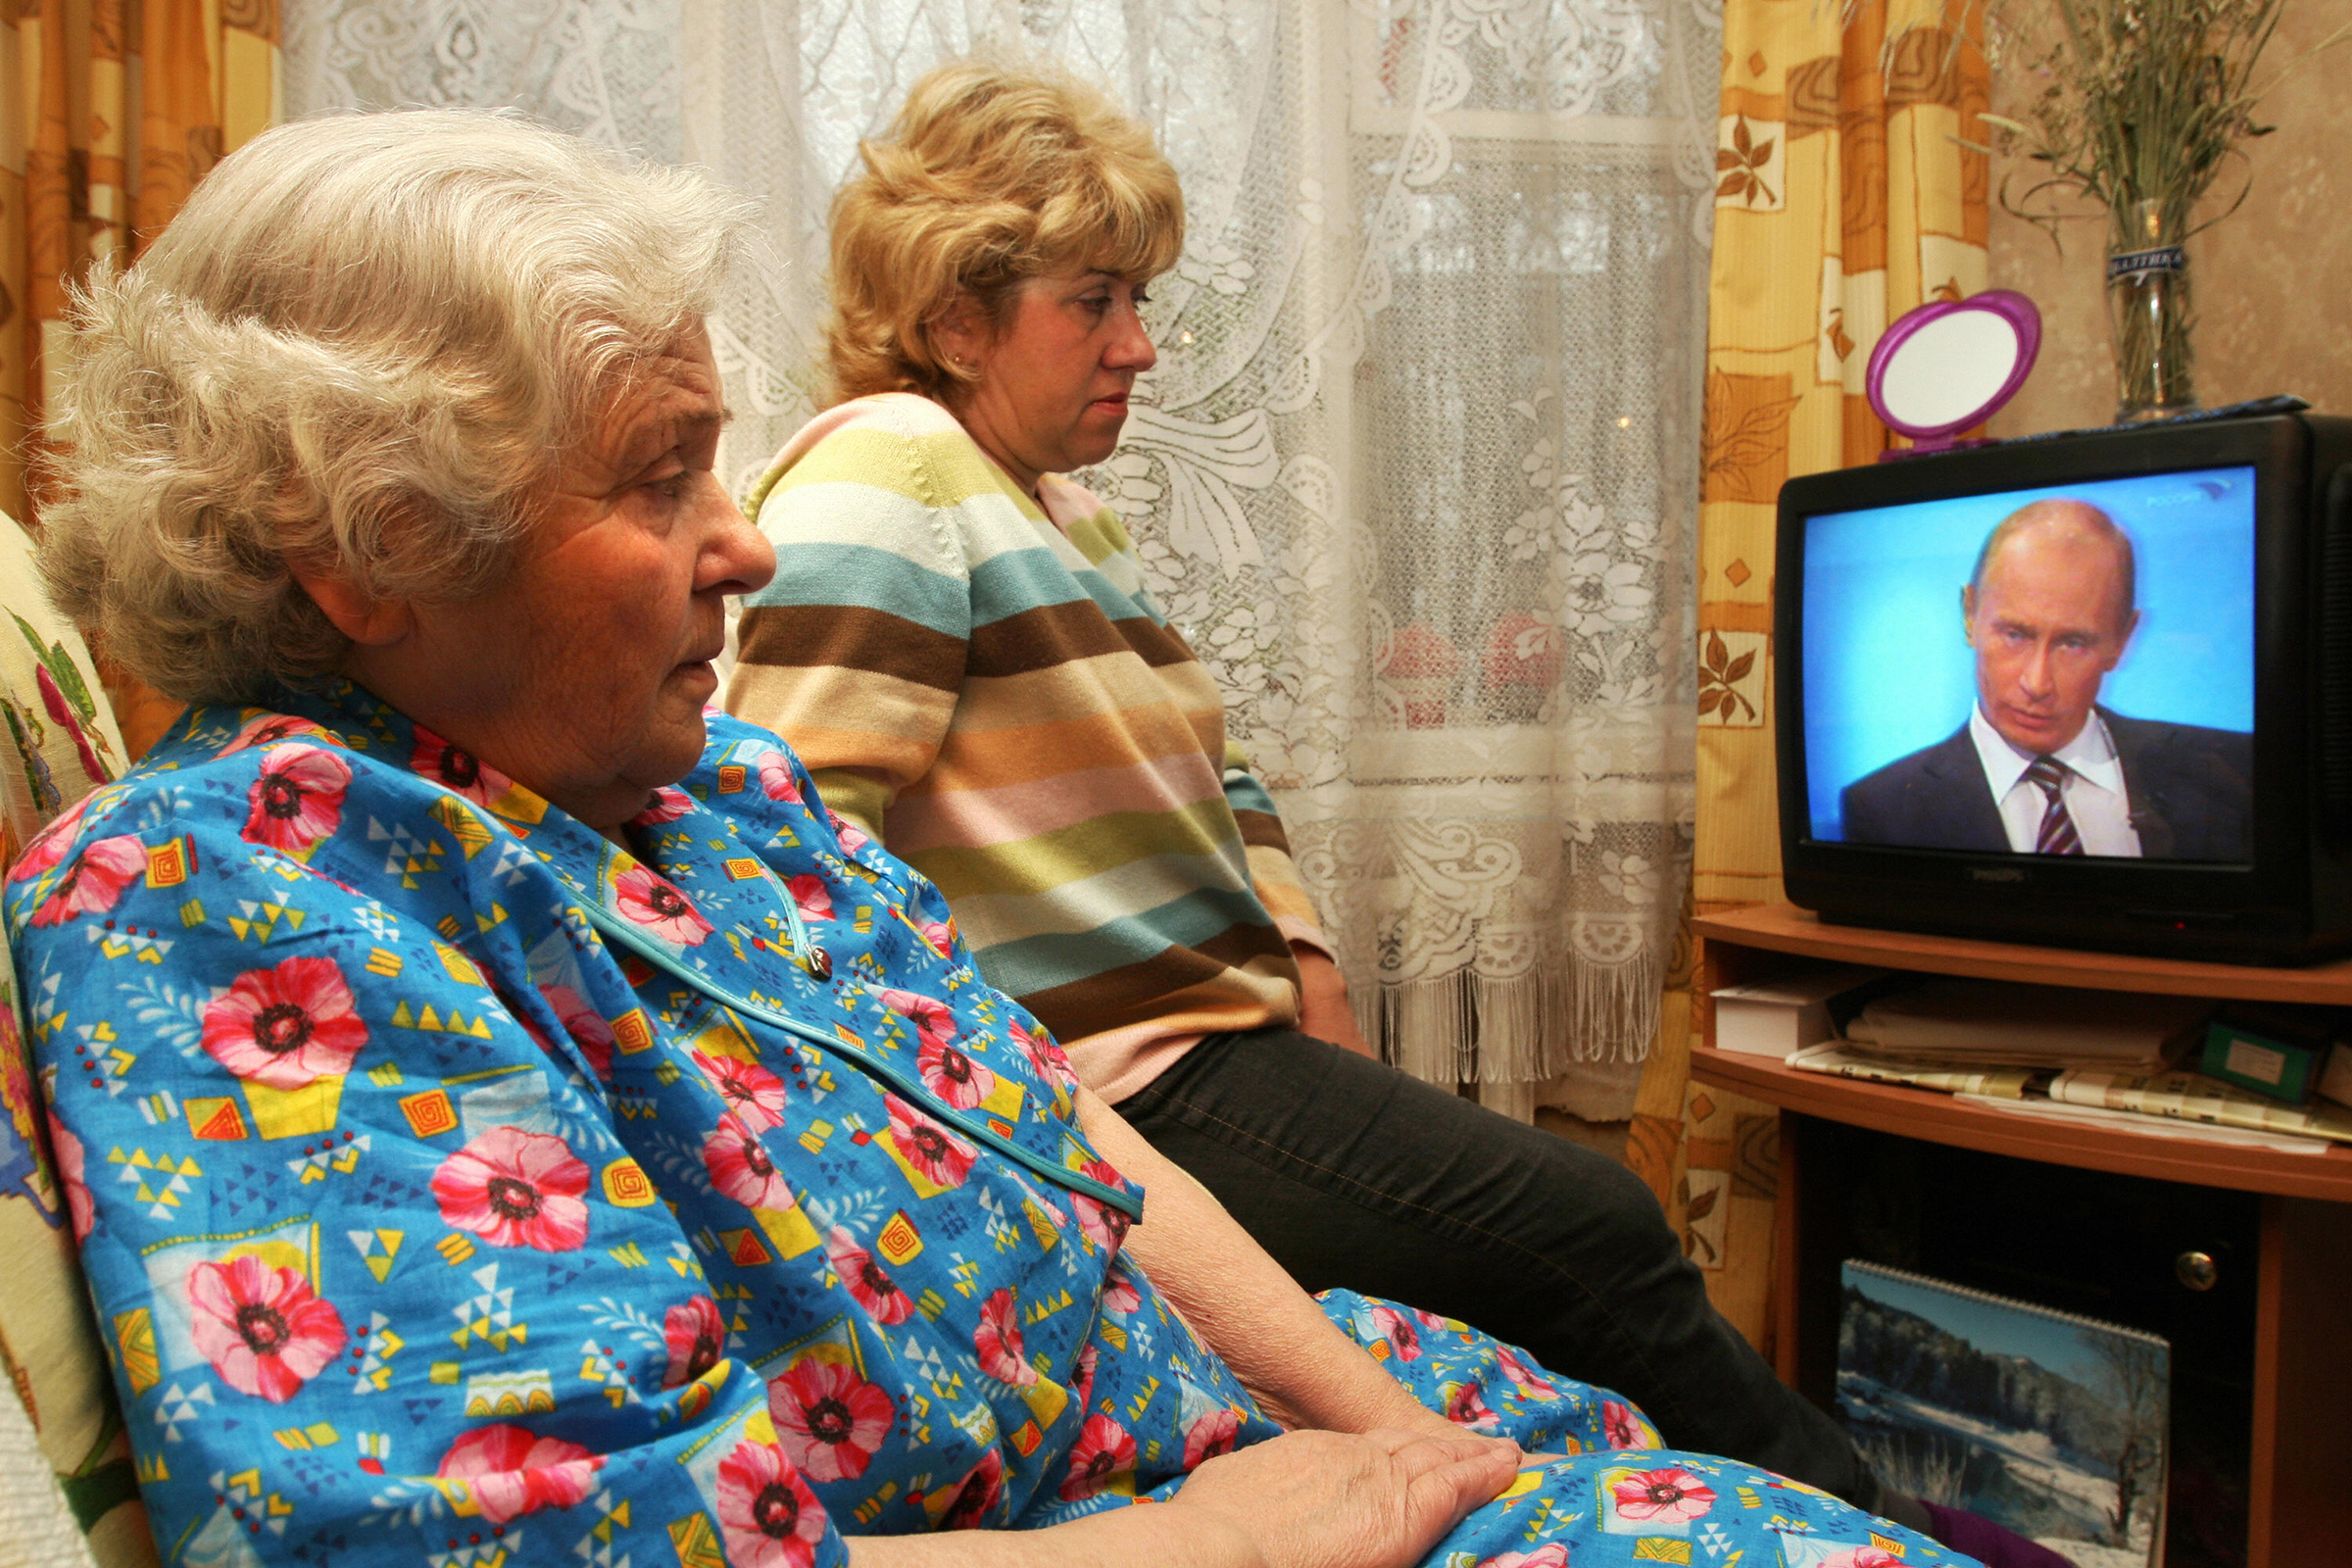 Two Russian women Olga (L) and her daughter Nadia (R) watch Russian Prime Minister Vladimir Putin taking questions during a nationally televised town-hall style session in Shcherbika on December 4, 2008. Putin ruled out early presidential elections, saying the next presidential ballot in Russia would be held as scheduled in 2012. (Andrei Smirnov —AFP/Getty Images)